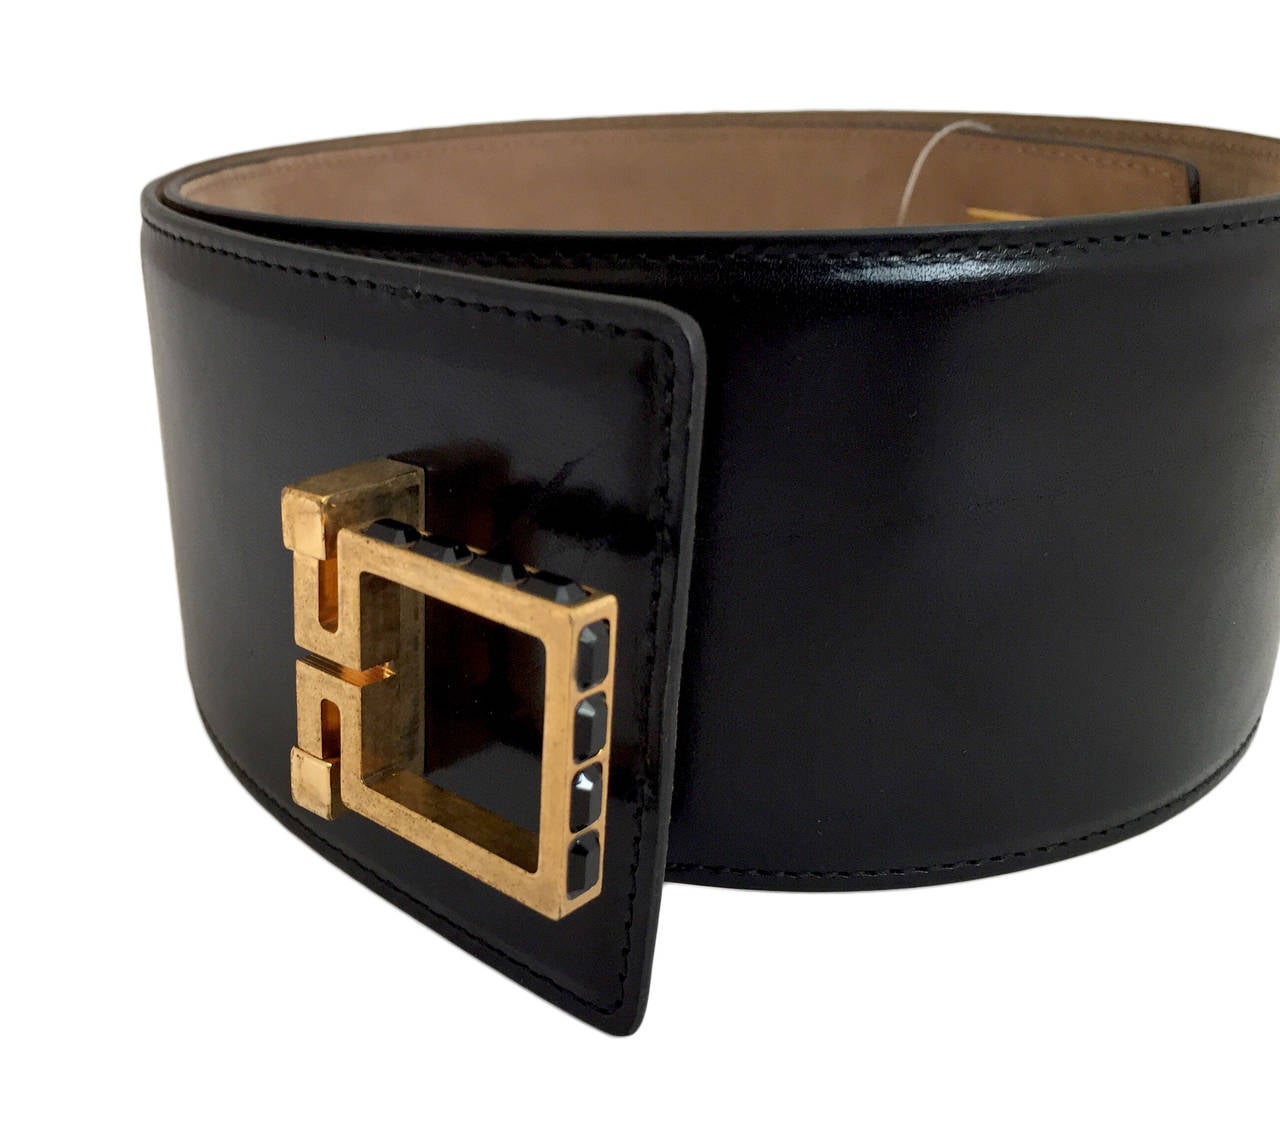 Black Alexander McQueen wide leather belt with gold-tone hardware, crystal embellishment and flip lock closure. Includes tags.

Measurements: Length 35“, Width 3”